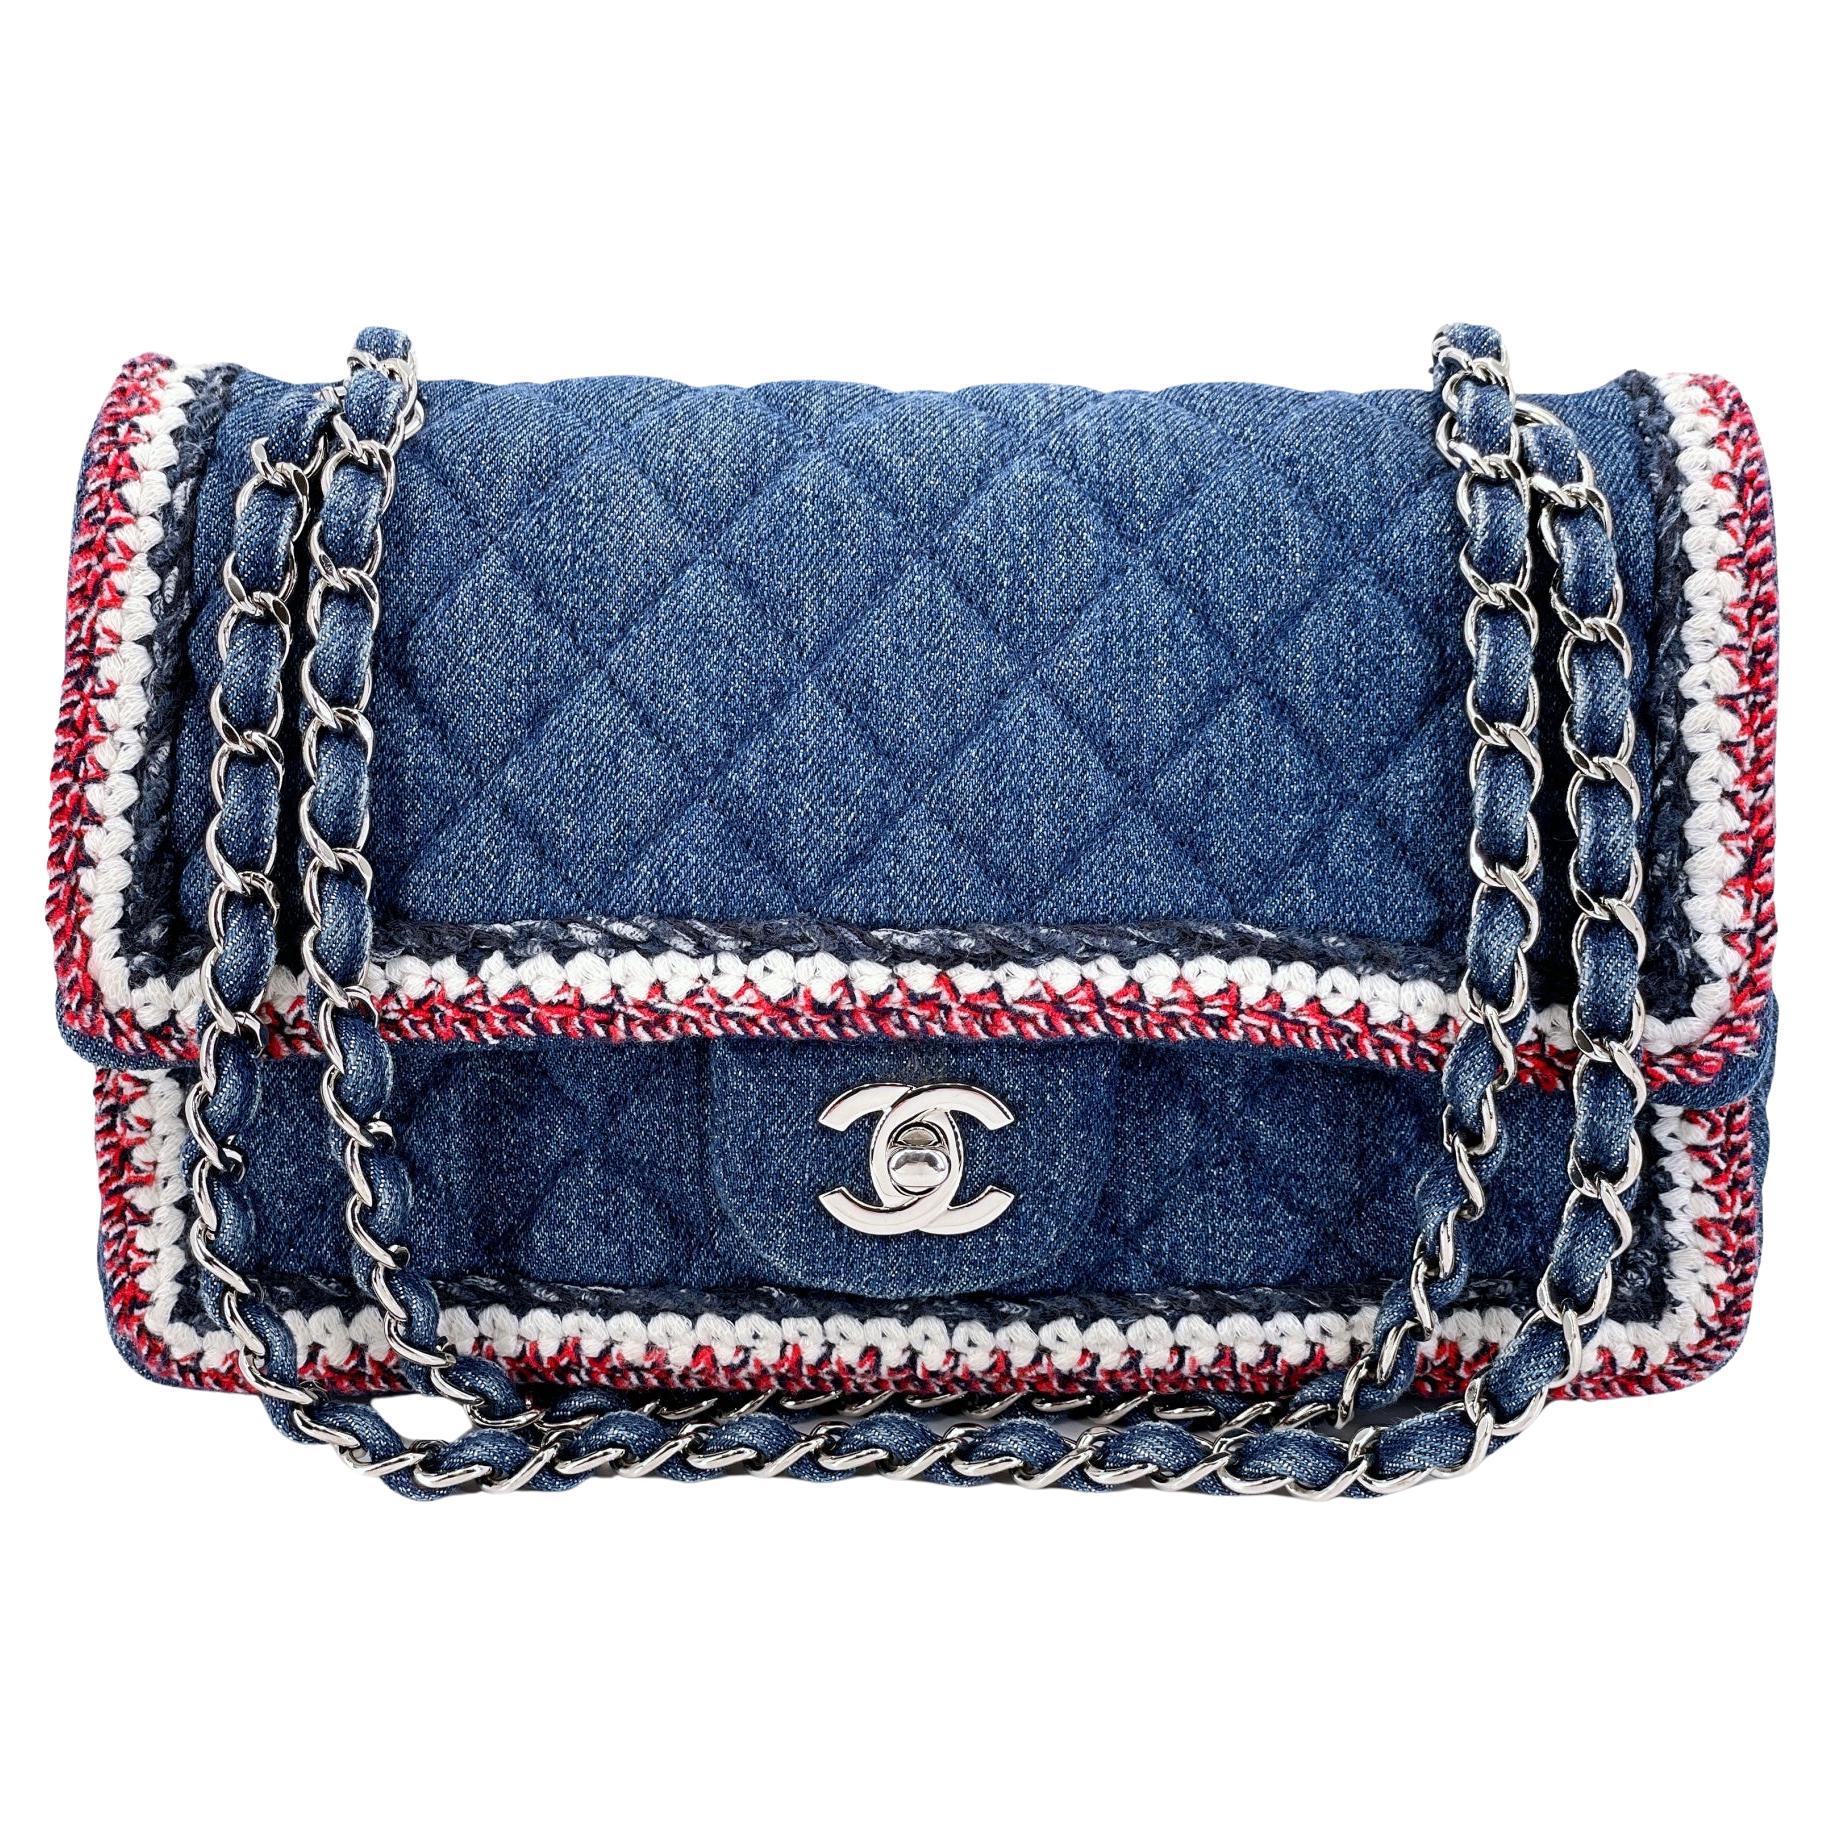 Where can I buy secondhand Chanel bags?